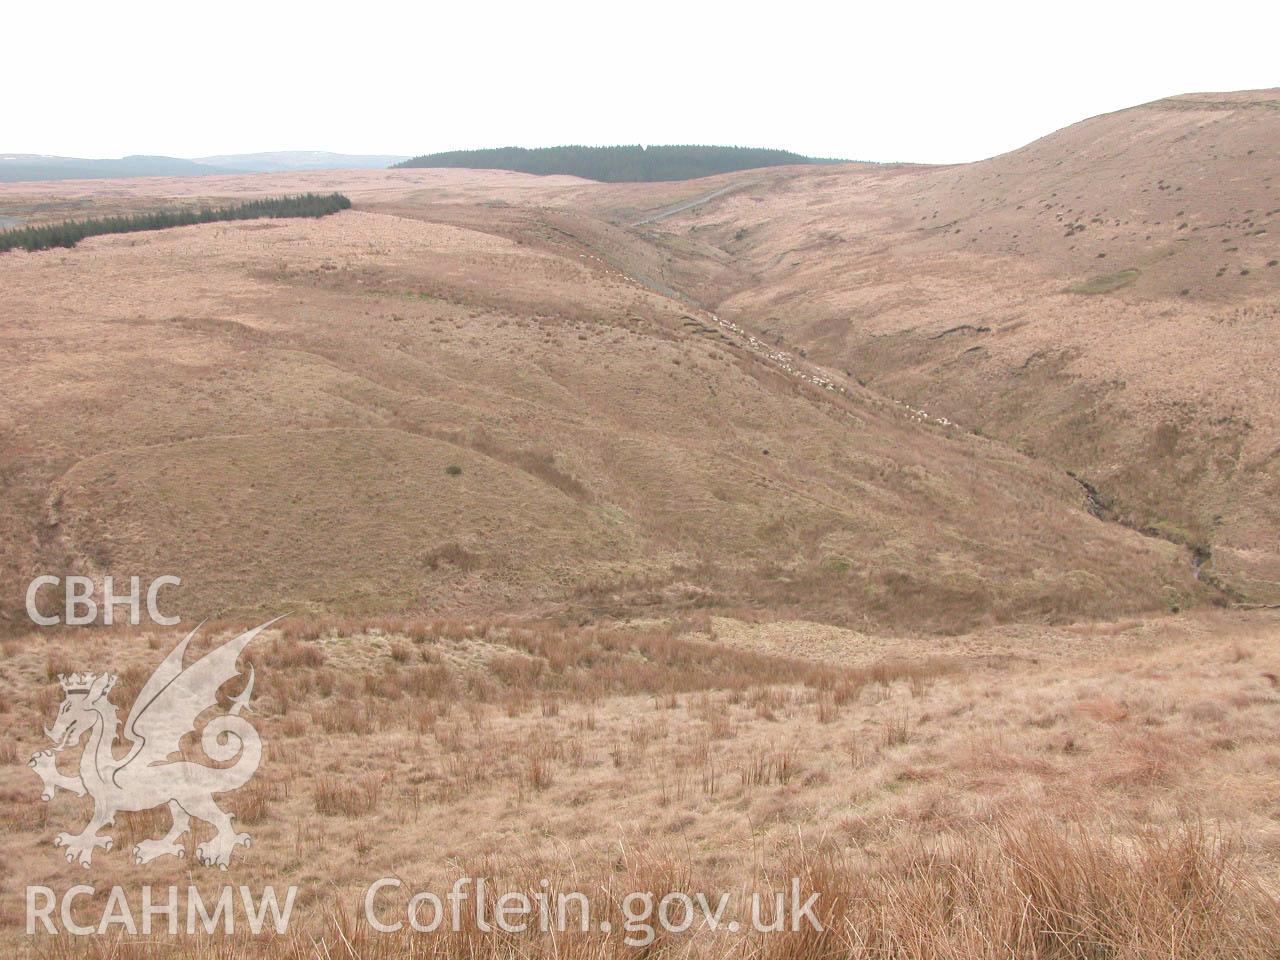 Second colour photograph showing the area of Blaen Bidno.